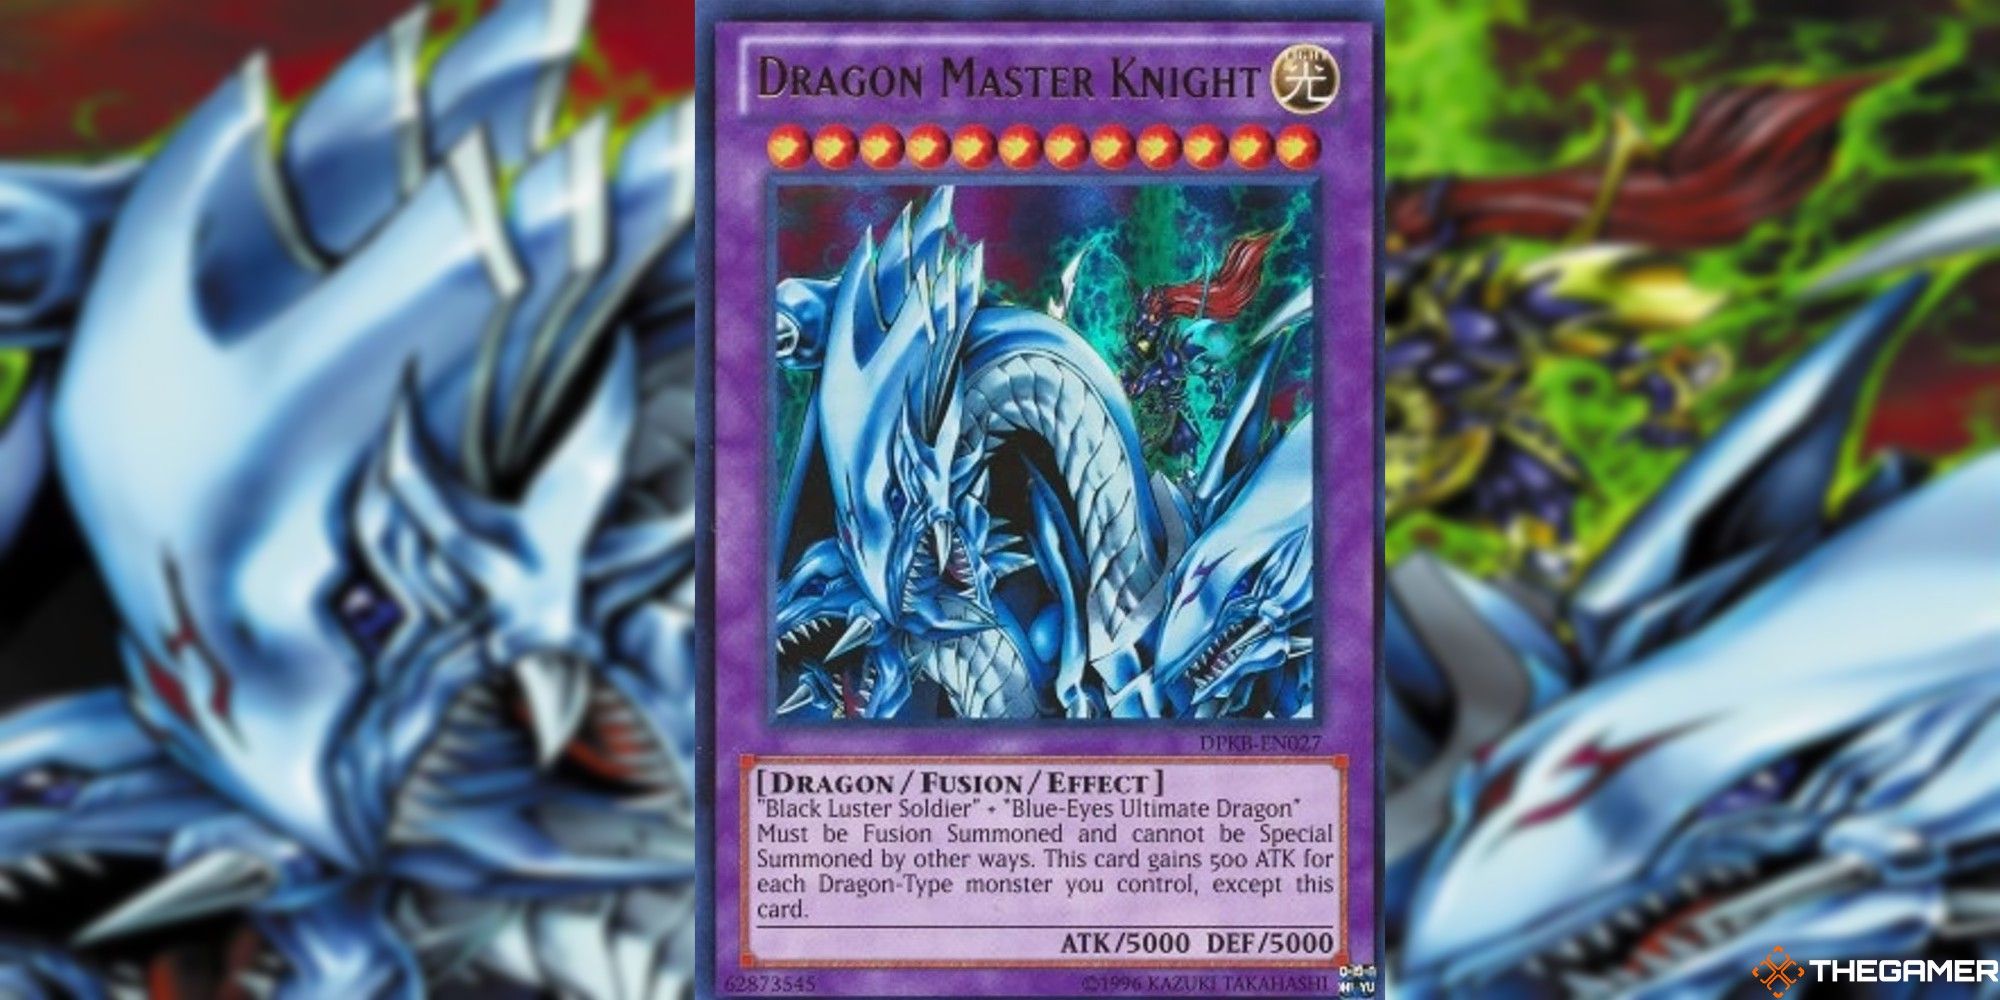 yugioh dragon master knight full card and art background